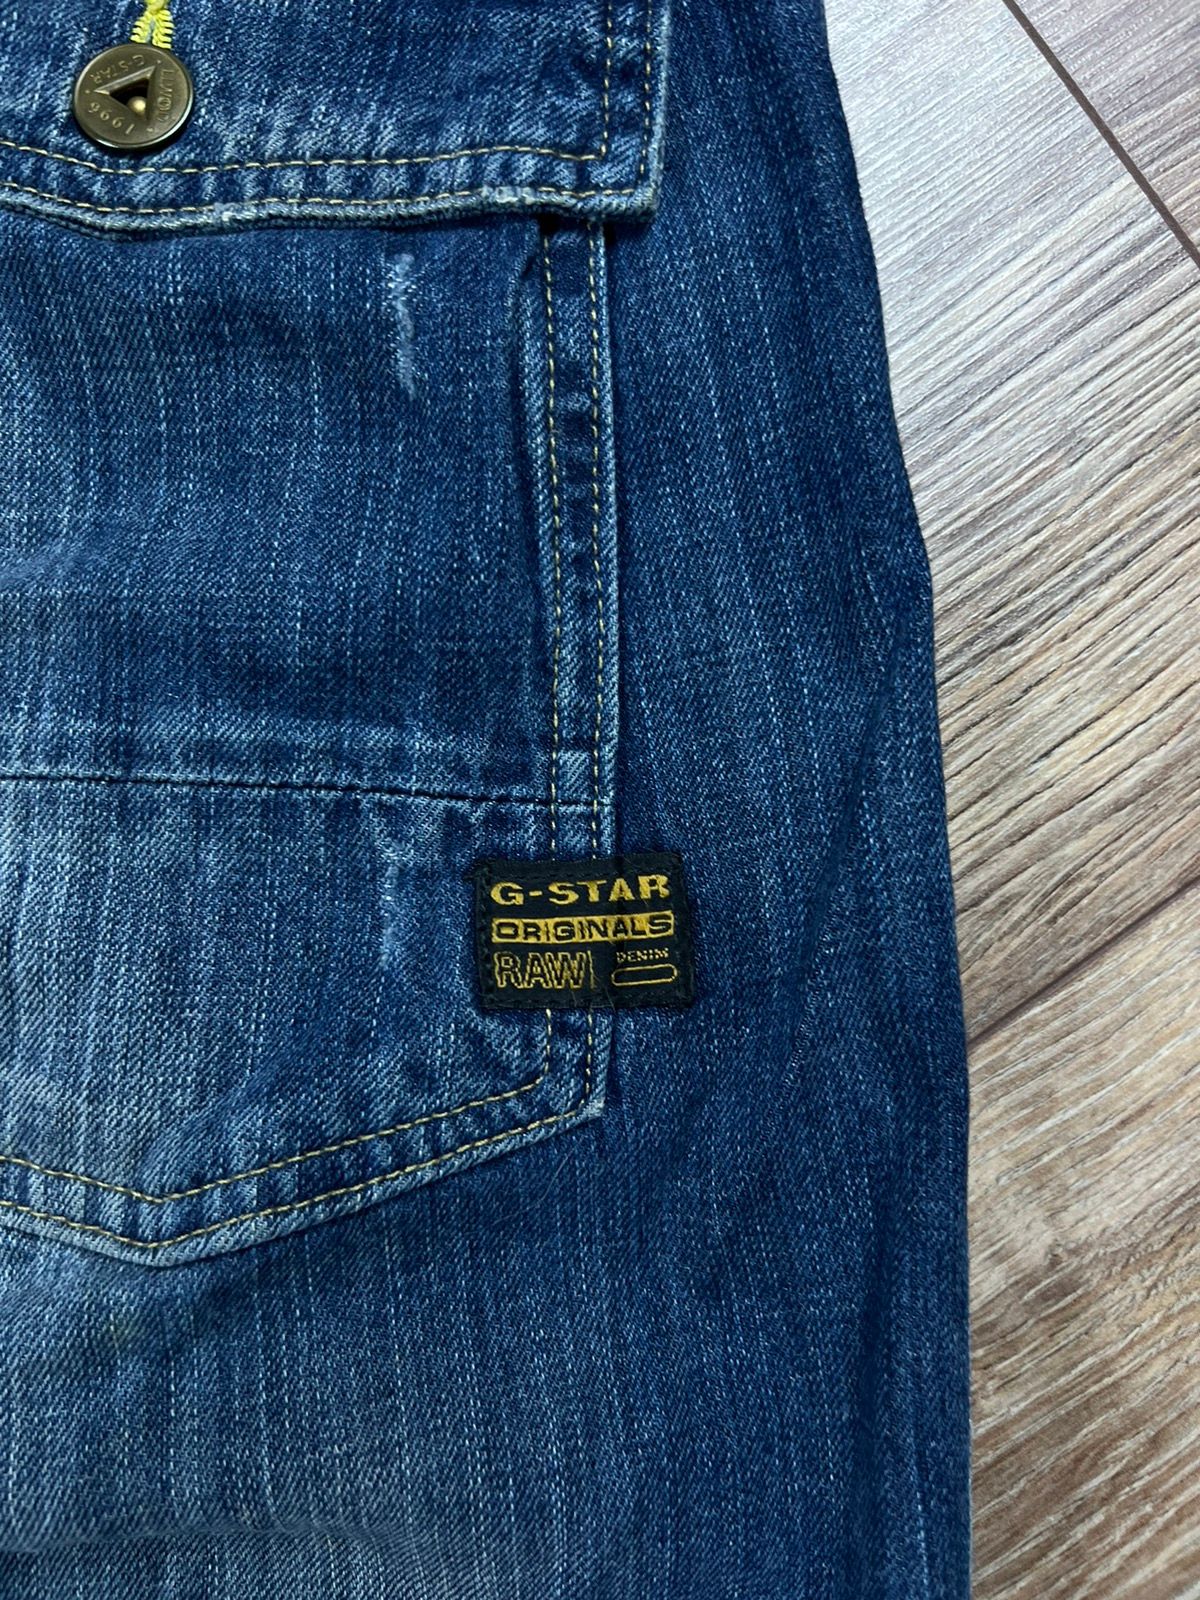 Vintage 💫 90’S G-STAR RAW VINTAGE DOUBLE KNEE OPIUM WASHED JEANS Size US 30 / EU 46 - 4 Thumbnail